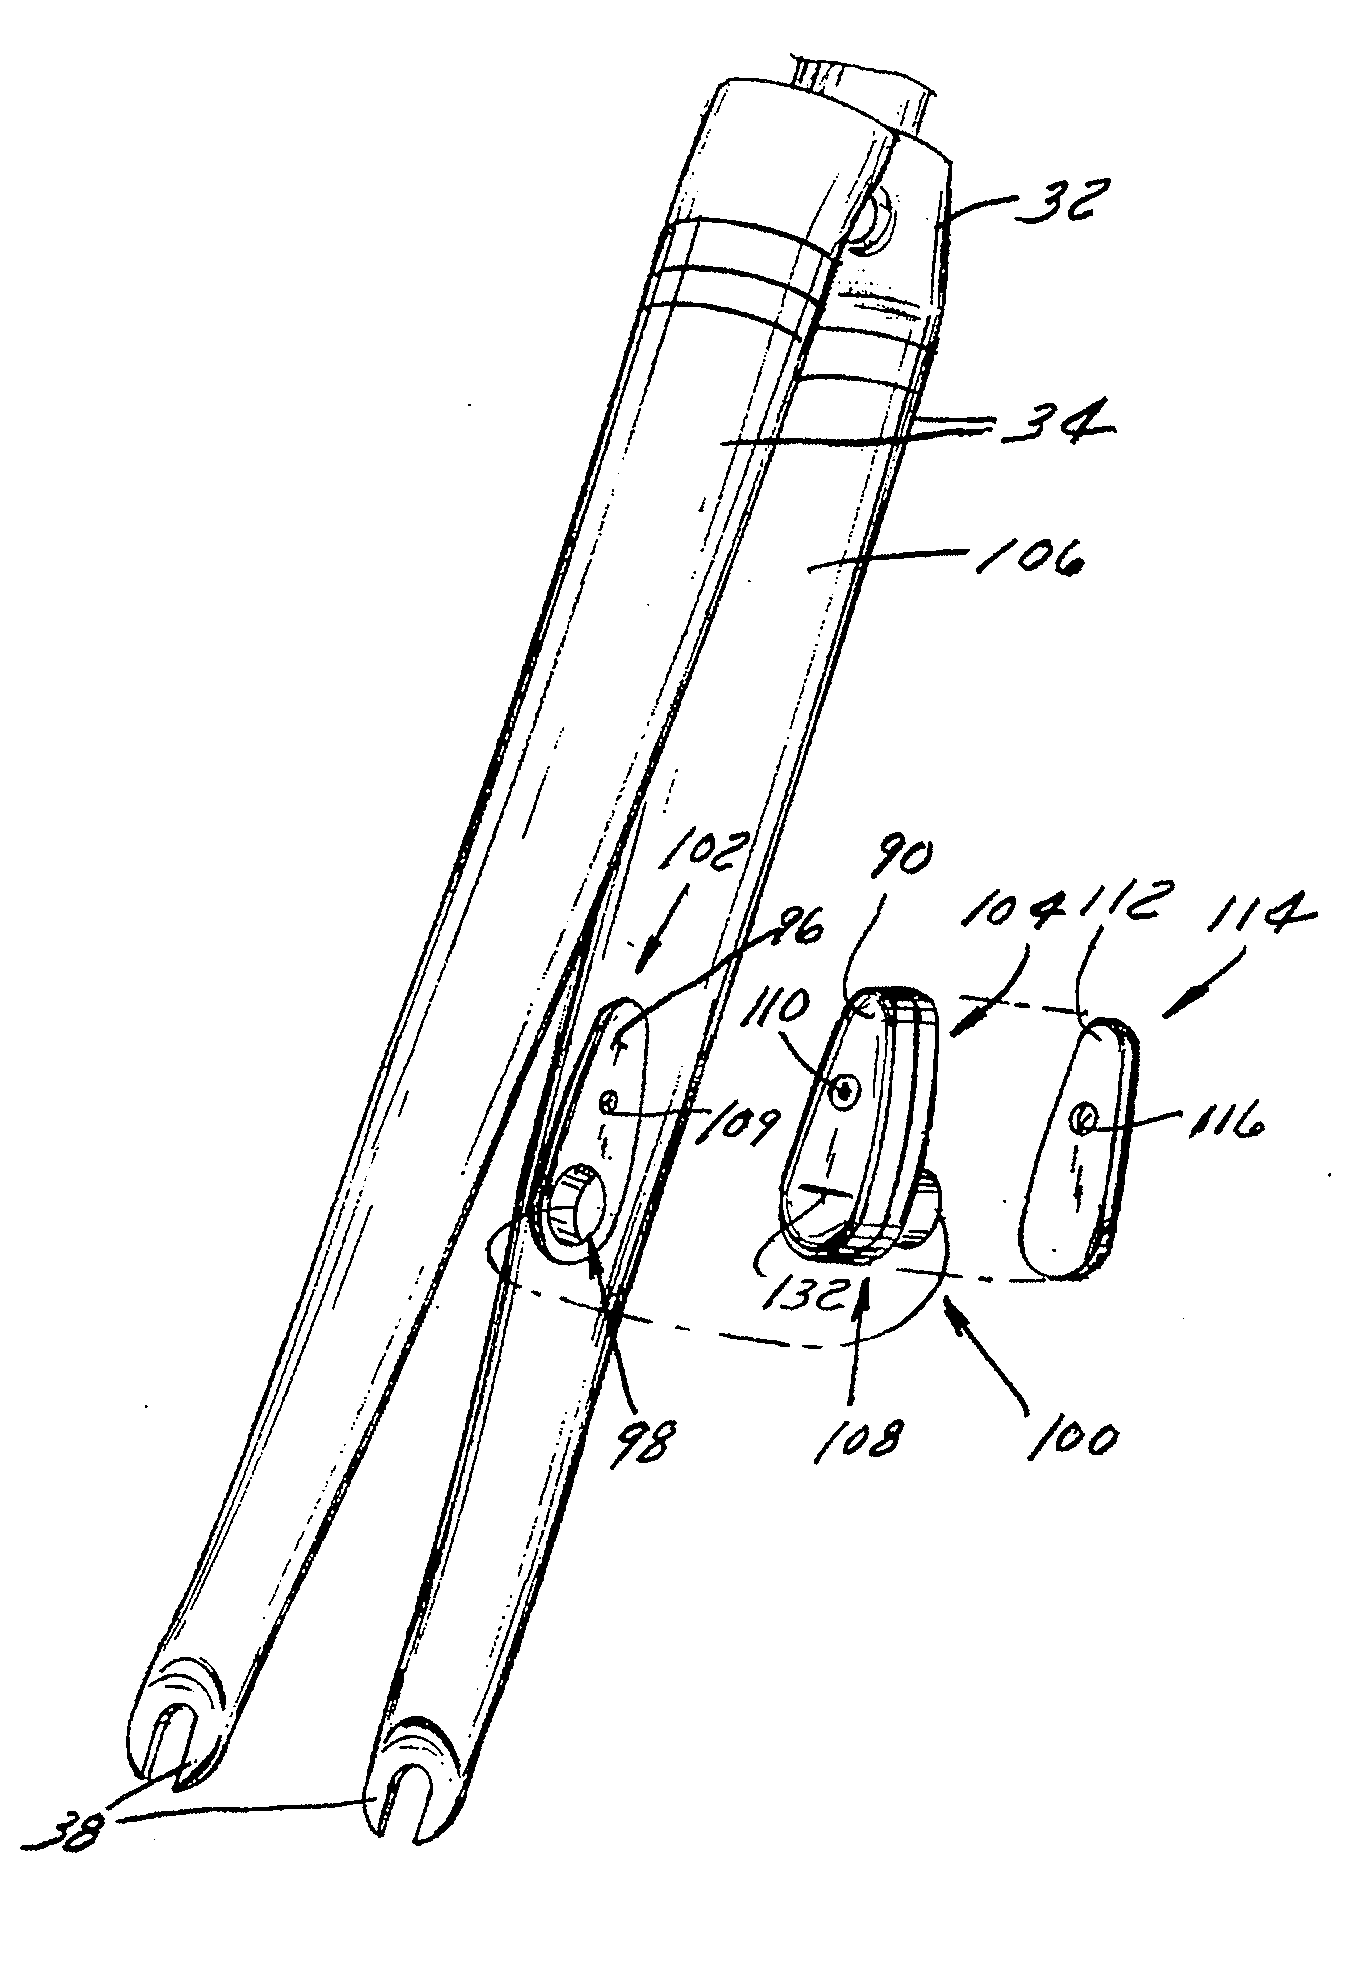 Bicycle frame with device cavity